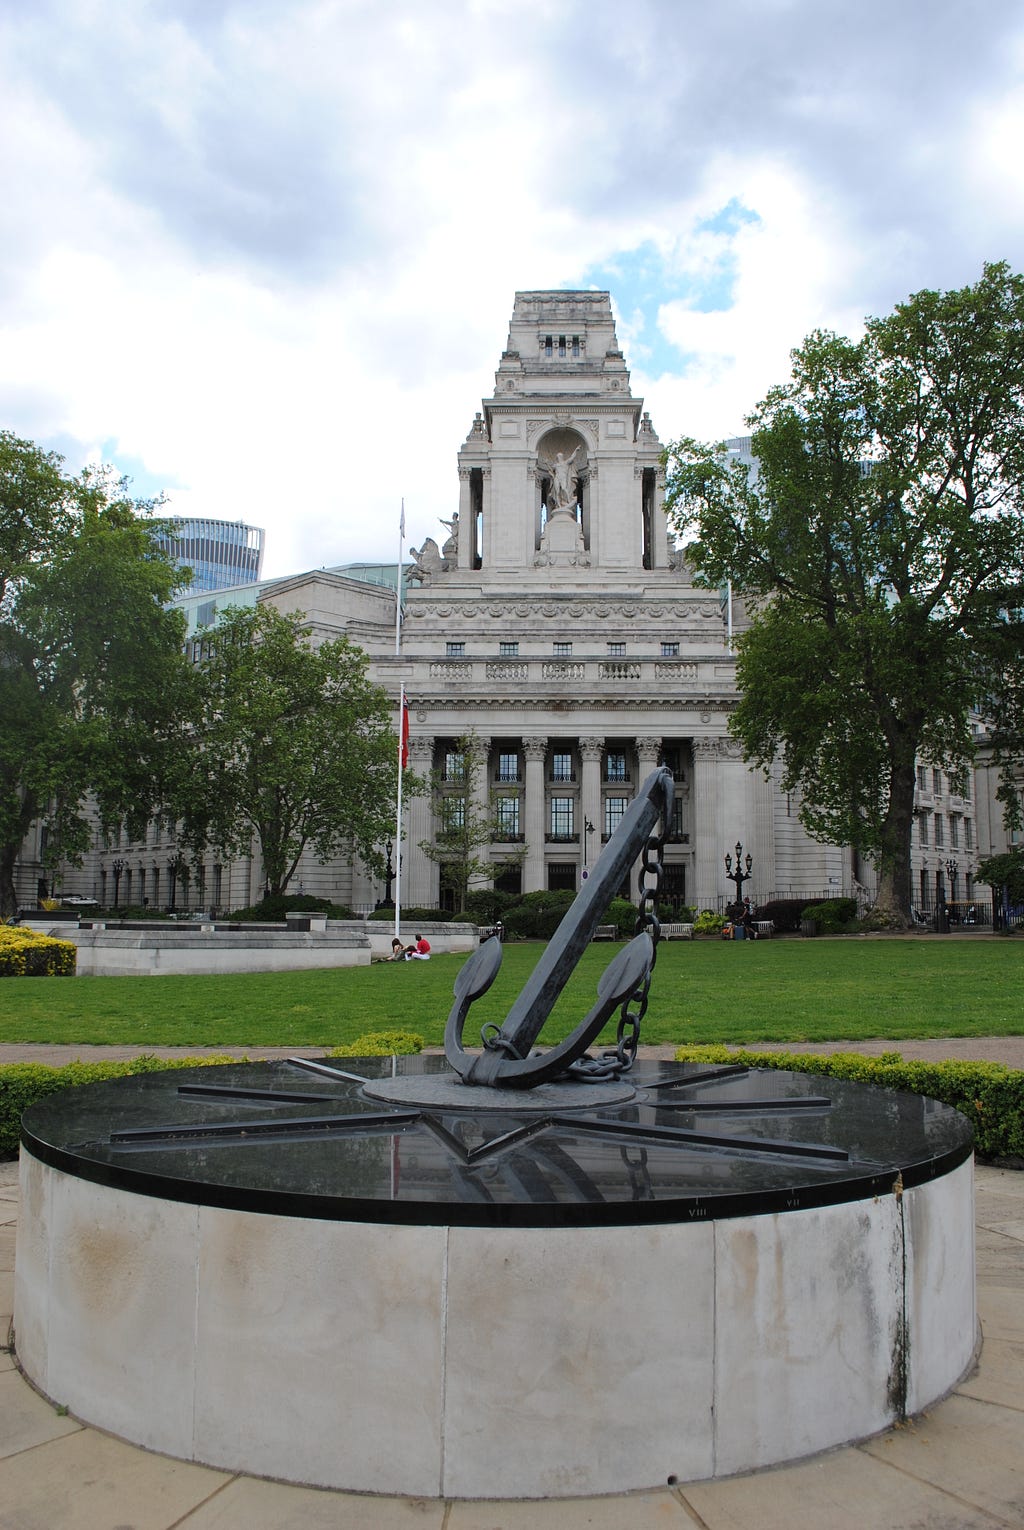 An anchor monument in front of a state building